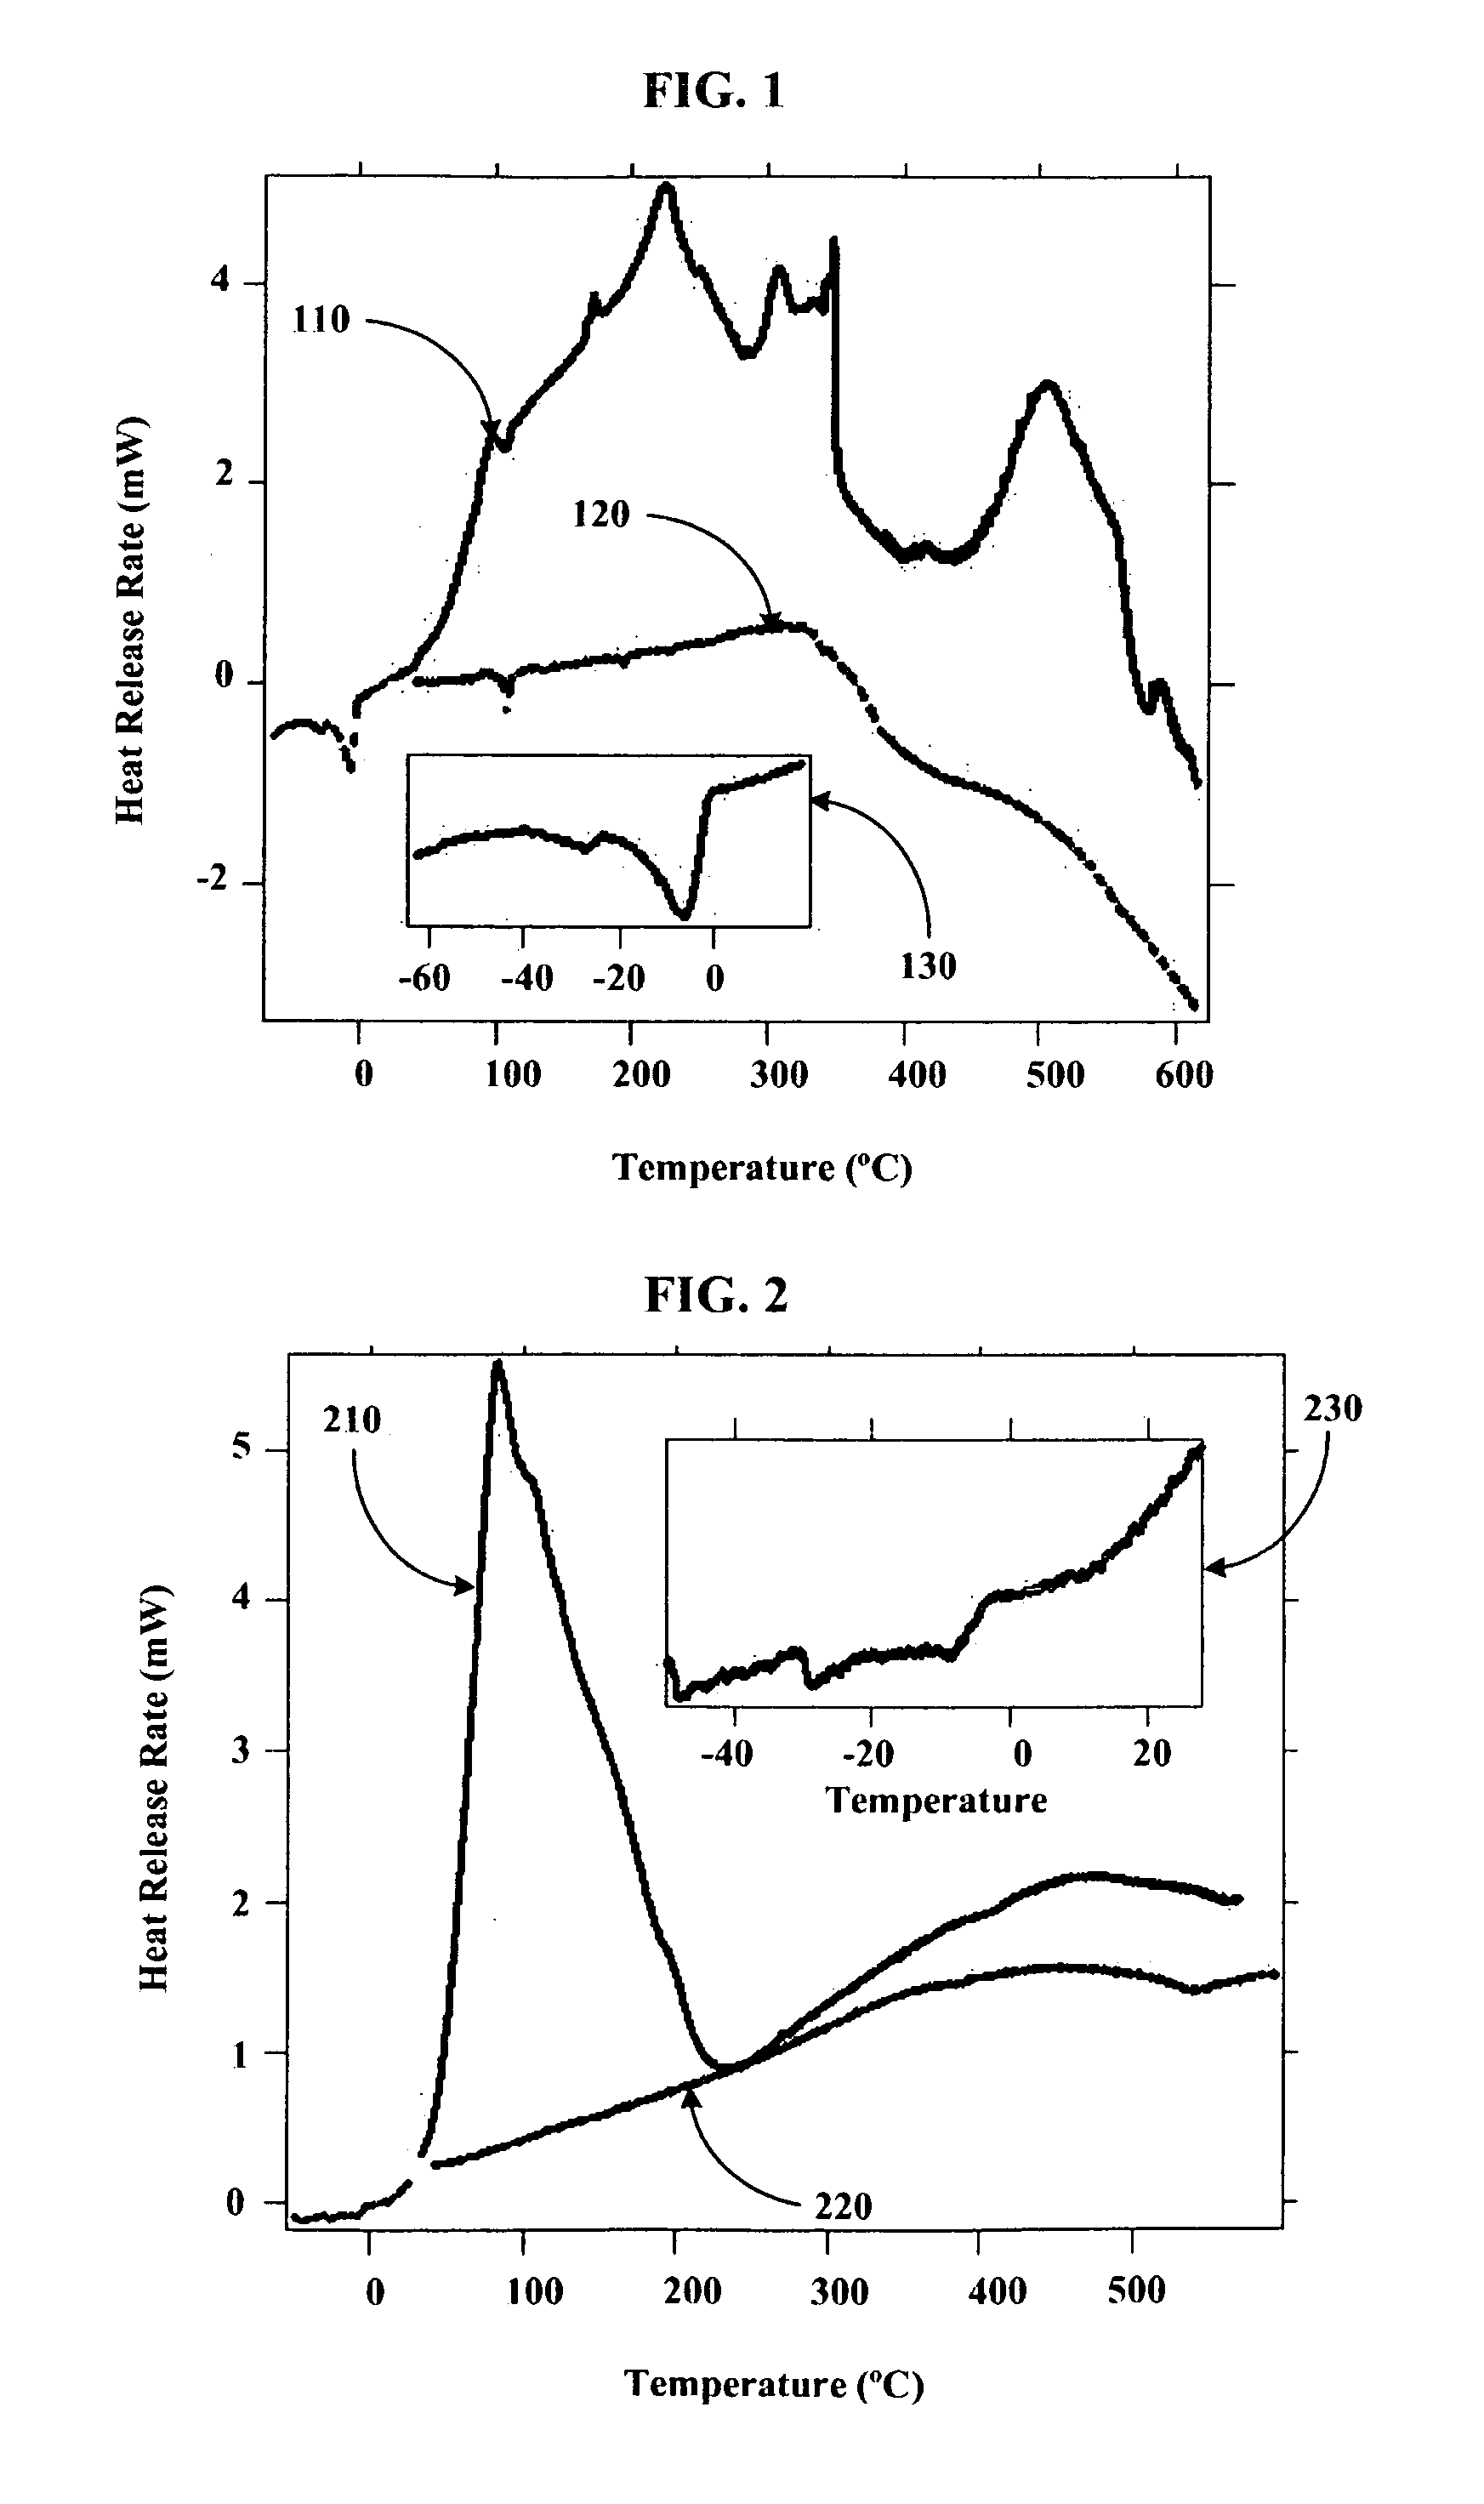 Silica gel compositions containing alkali metals and alkali metal alloys